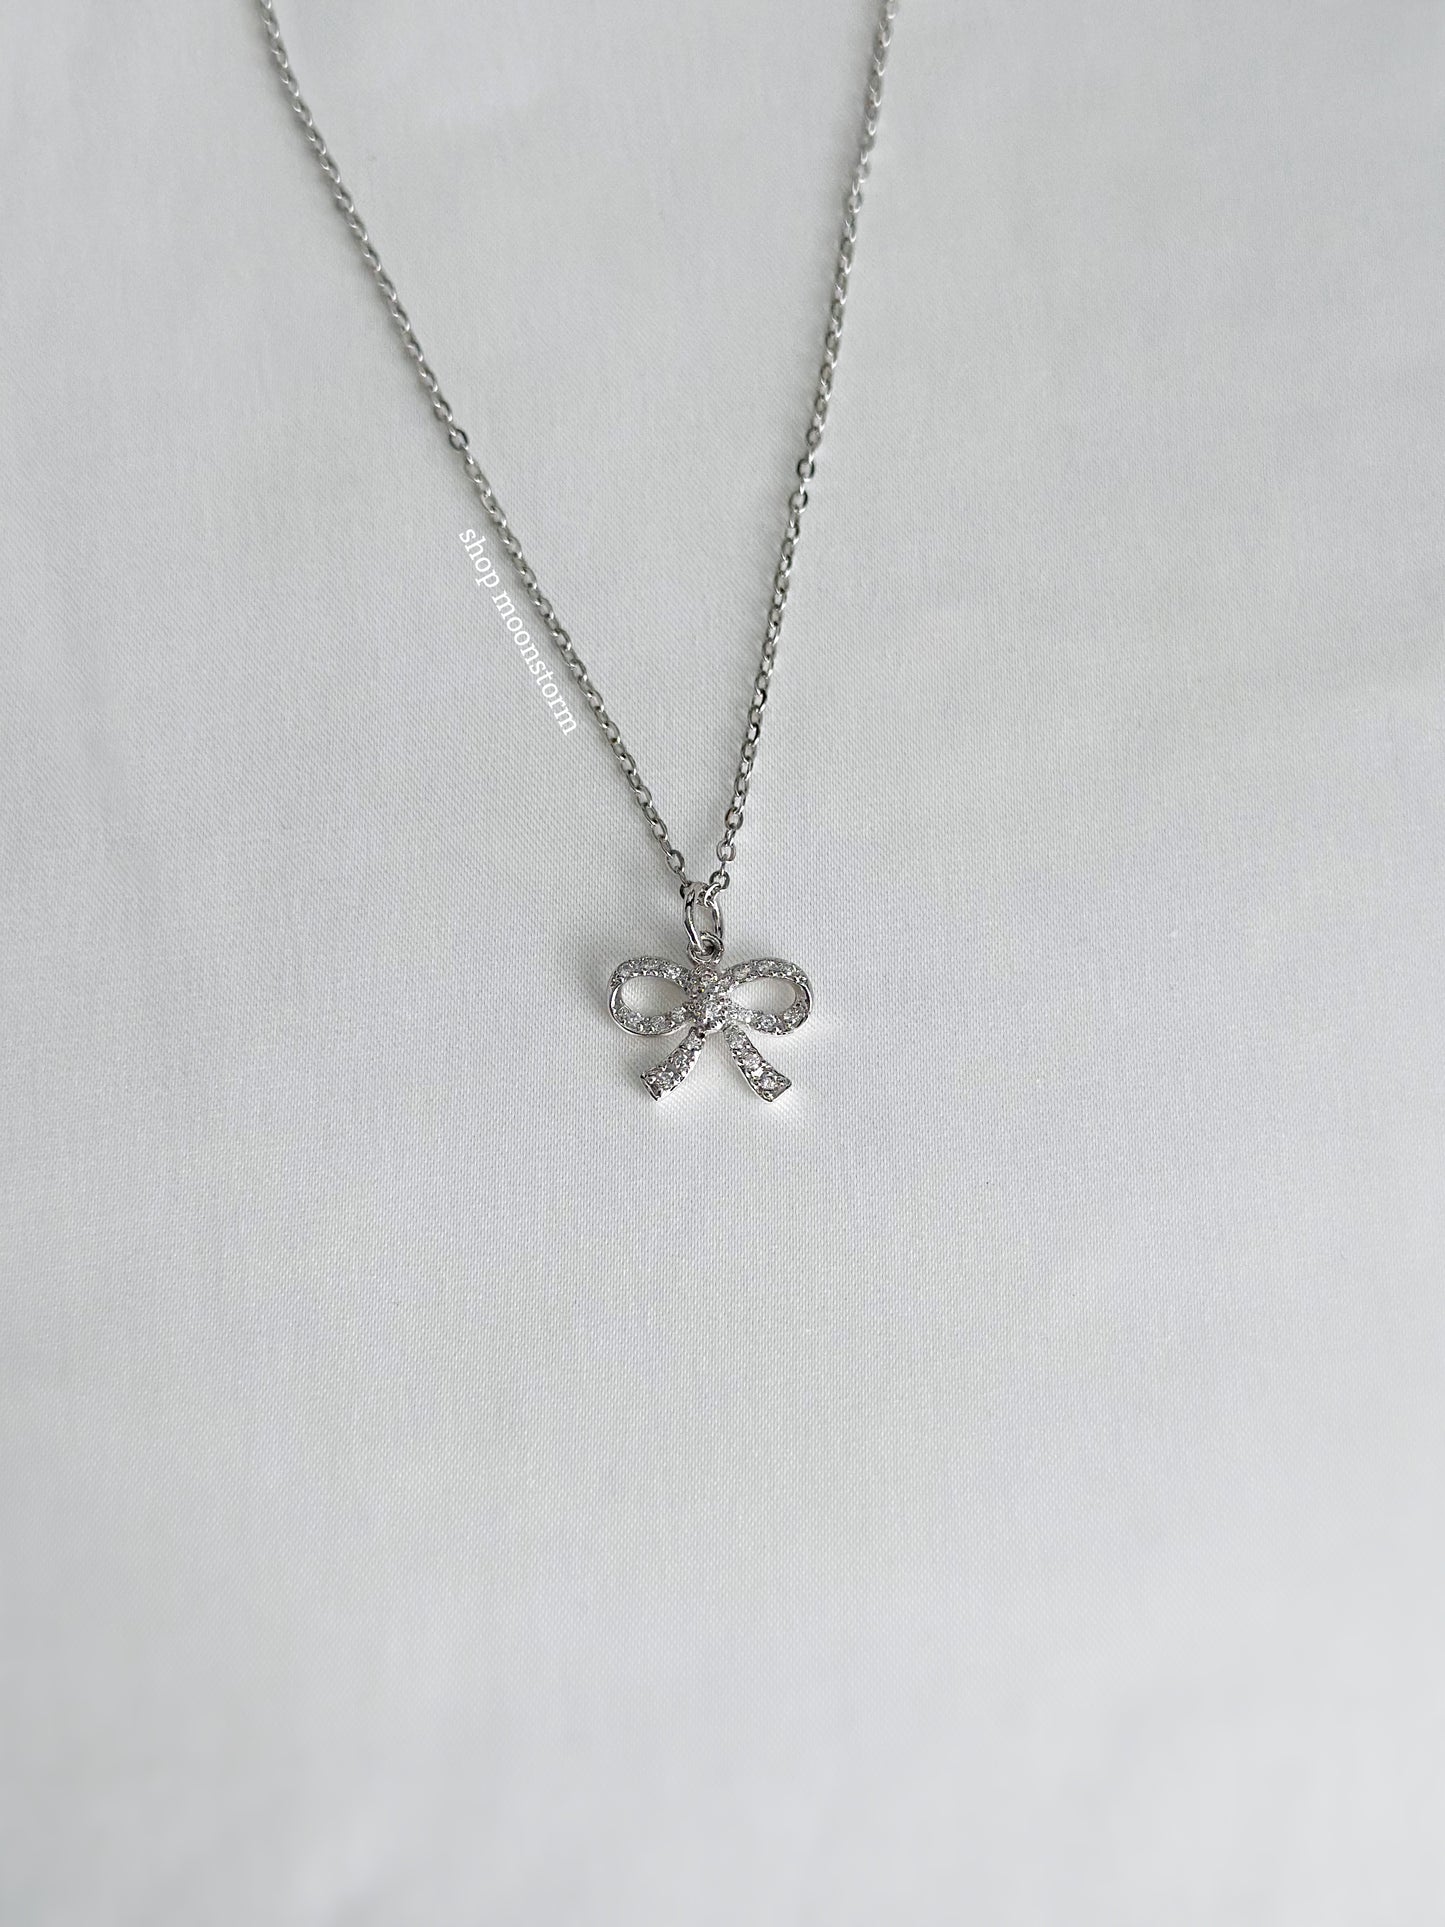 Dreamy Bow Necklace